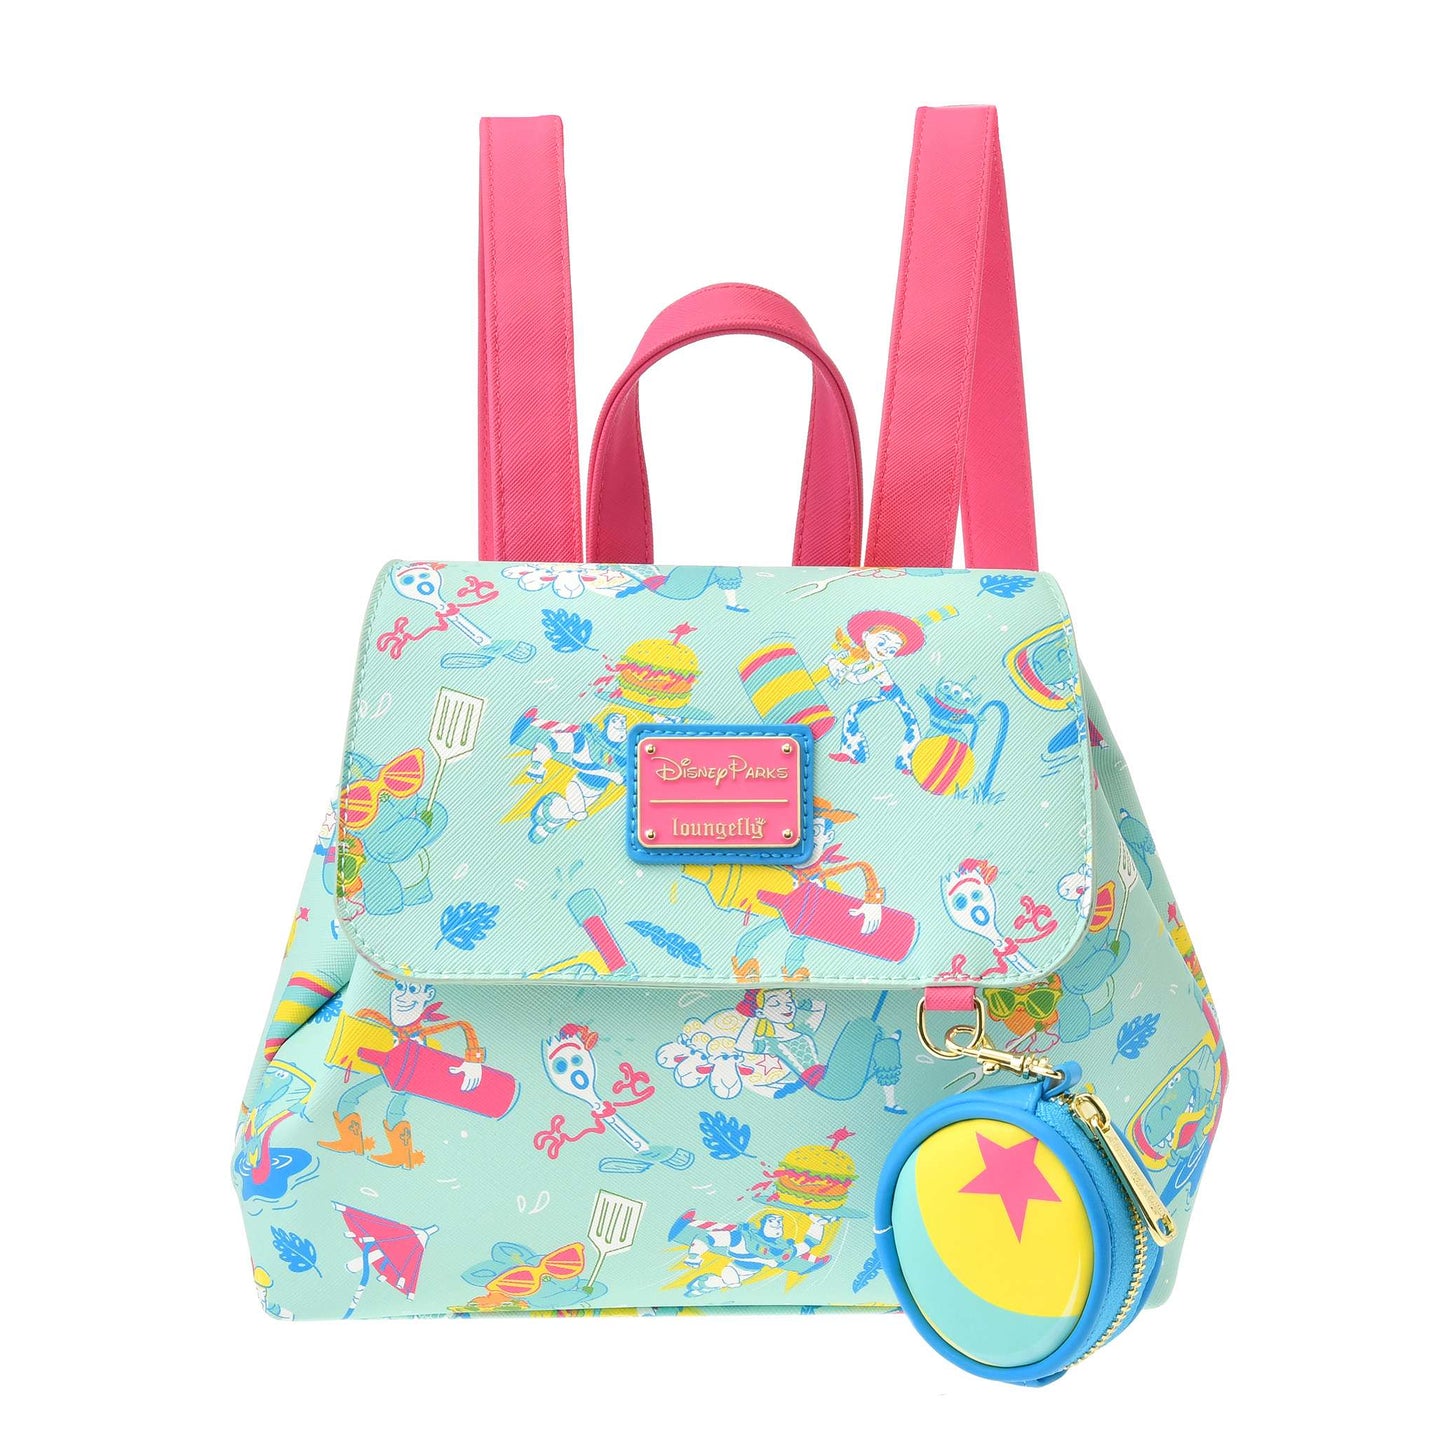 Disney Store - Loungefly Toy Story 4 - Rucksack